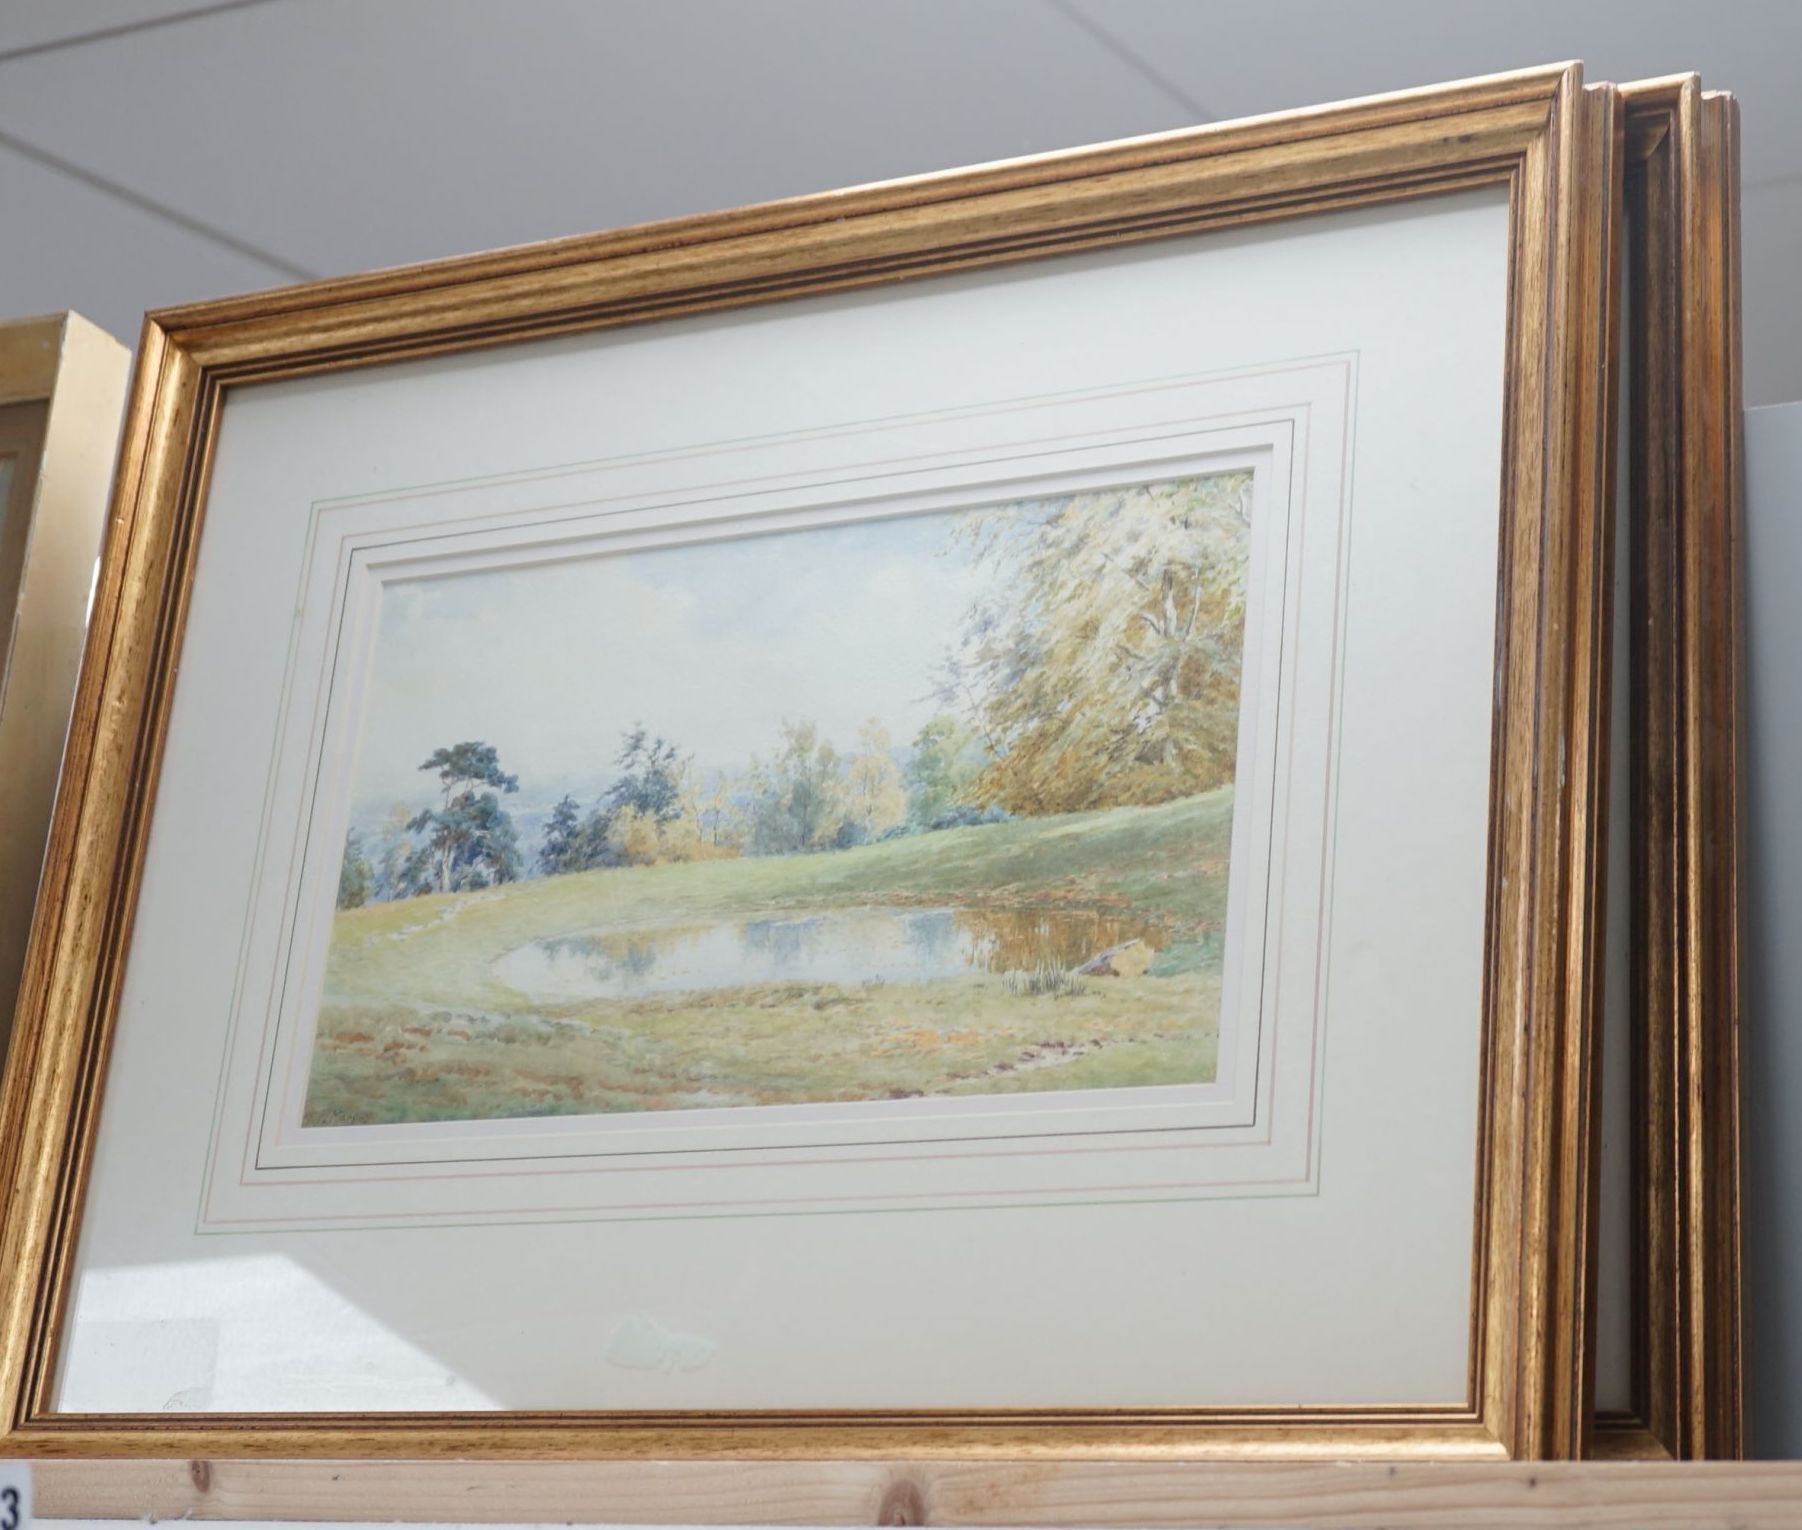 Elliot Haigh Marten (1865-1953), pair of watercolours, 'Autumn dew pond at Chanctonbury Woods' and 'Farm under Chanctonbury from Steyning Road', signed, 20 x 33cm